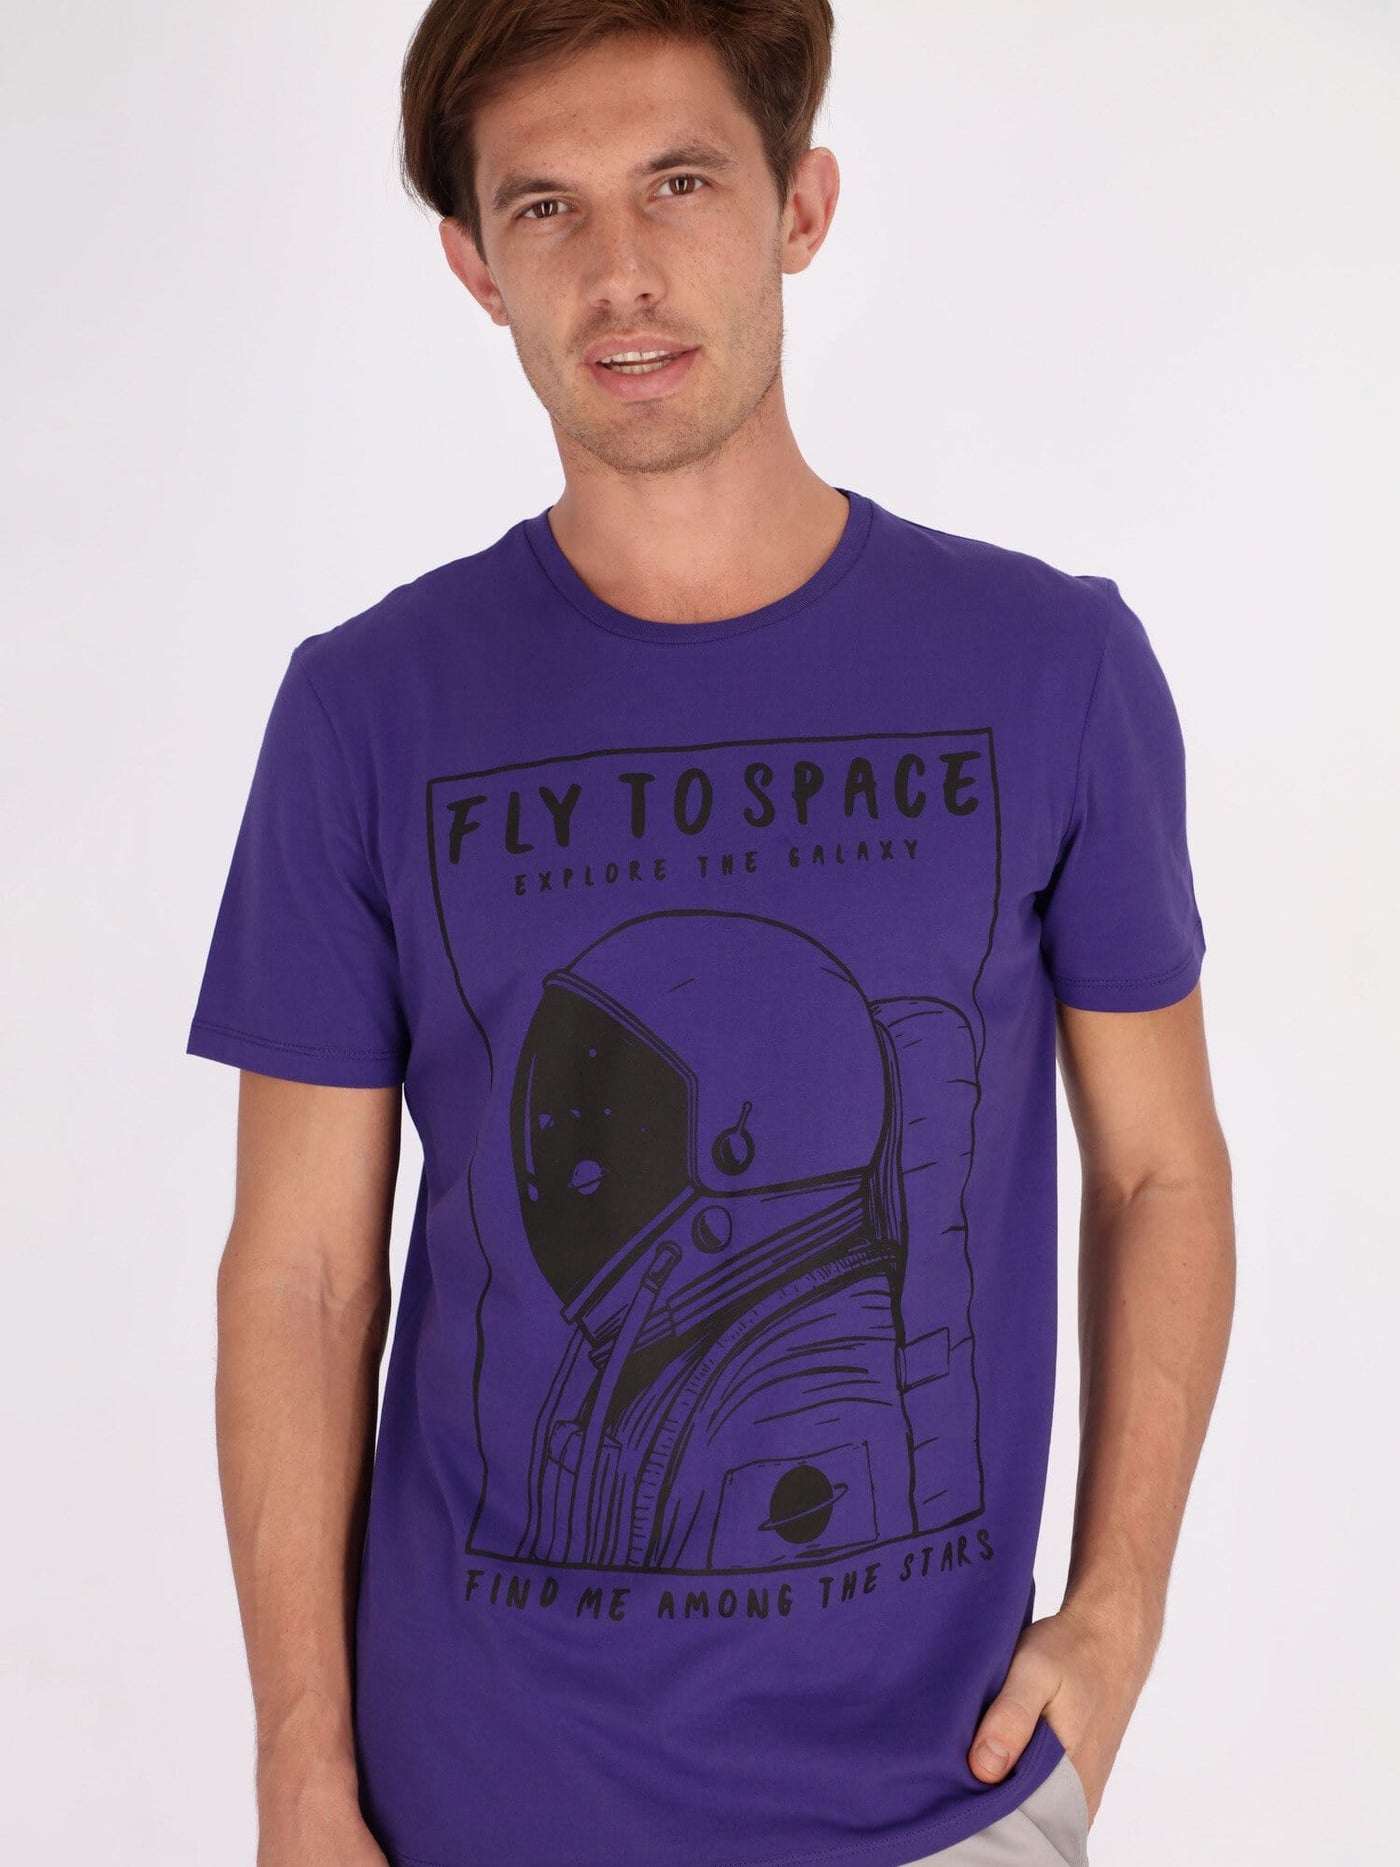 OR T-Shirts Dark Purple - V24 / S Front Print Fly to Space Short Sleeve T-Shirt